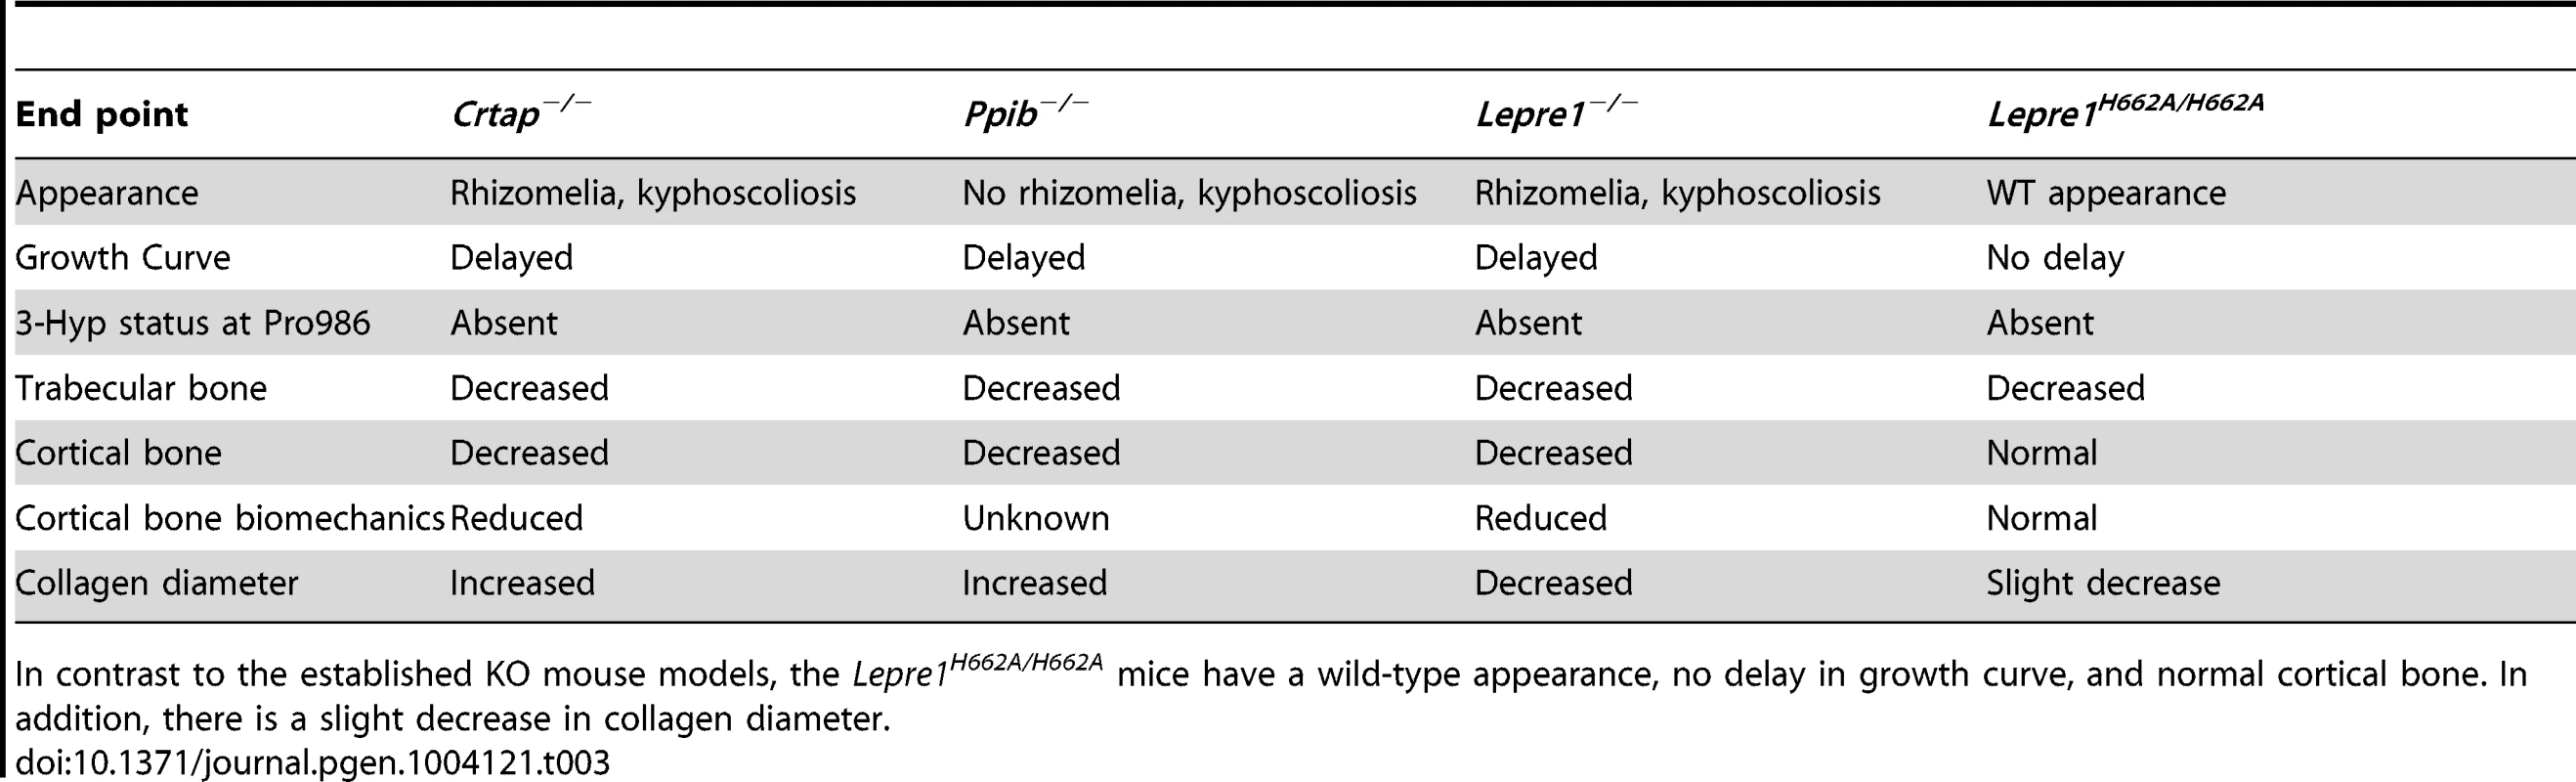 Table comparing <i>Lepre1<sup>H662A/H662A</sup></i> phenotype to established OI mouse models.